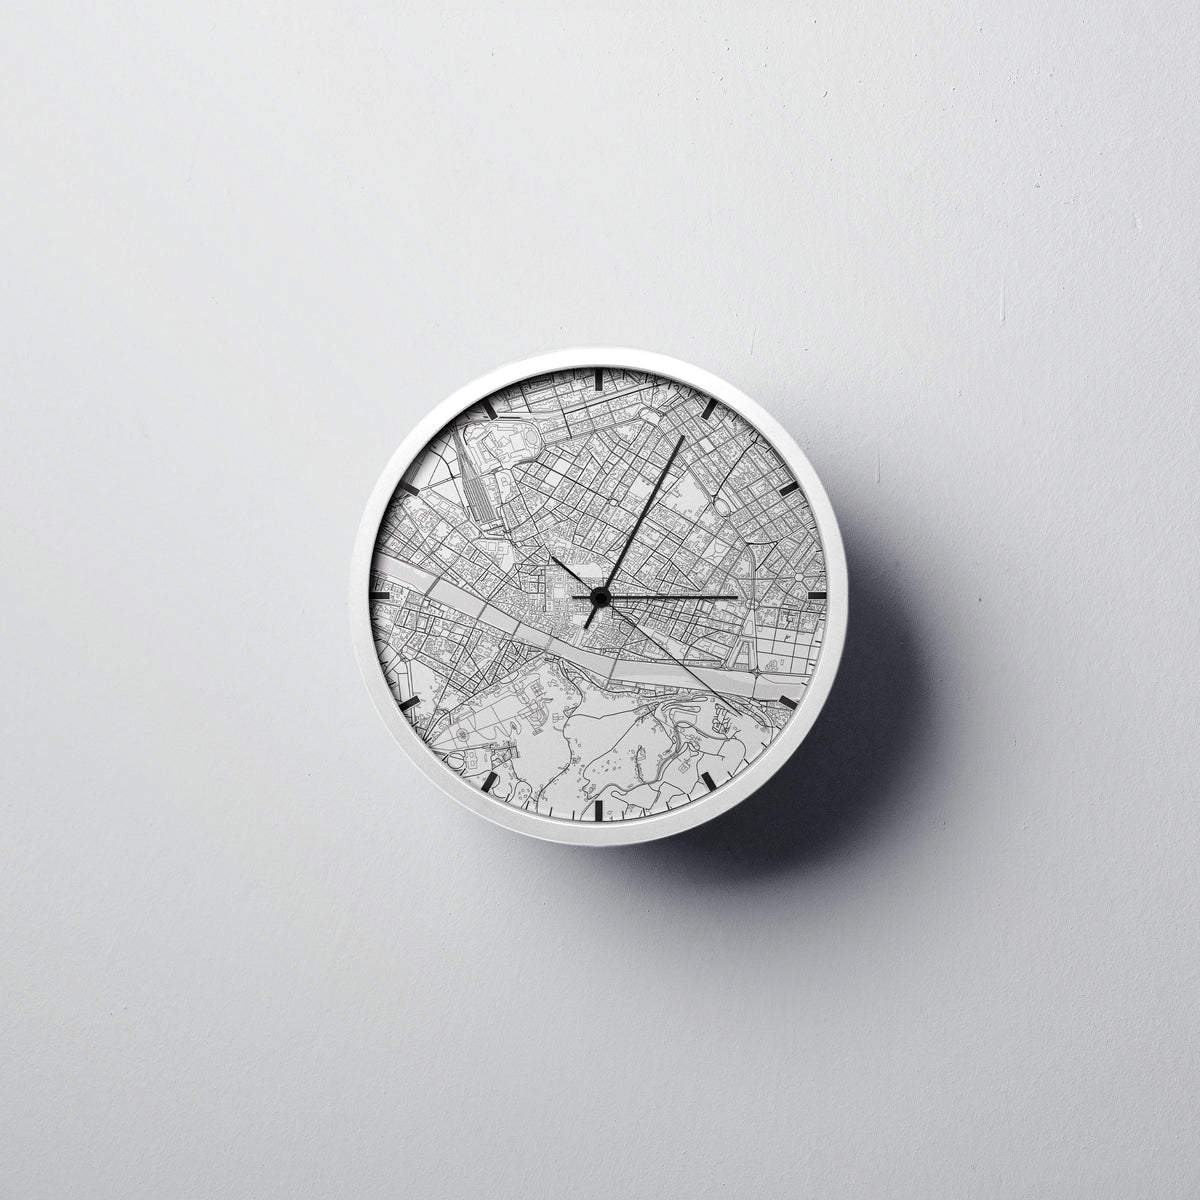 Florence Wall Clock - Point Two Design